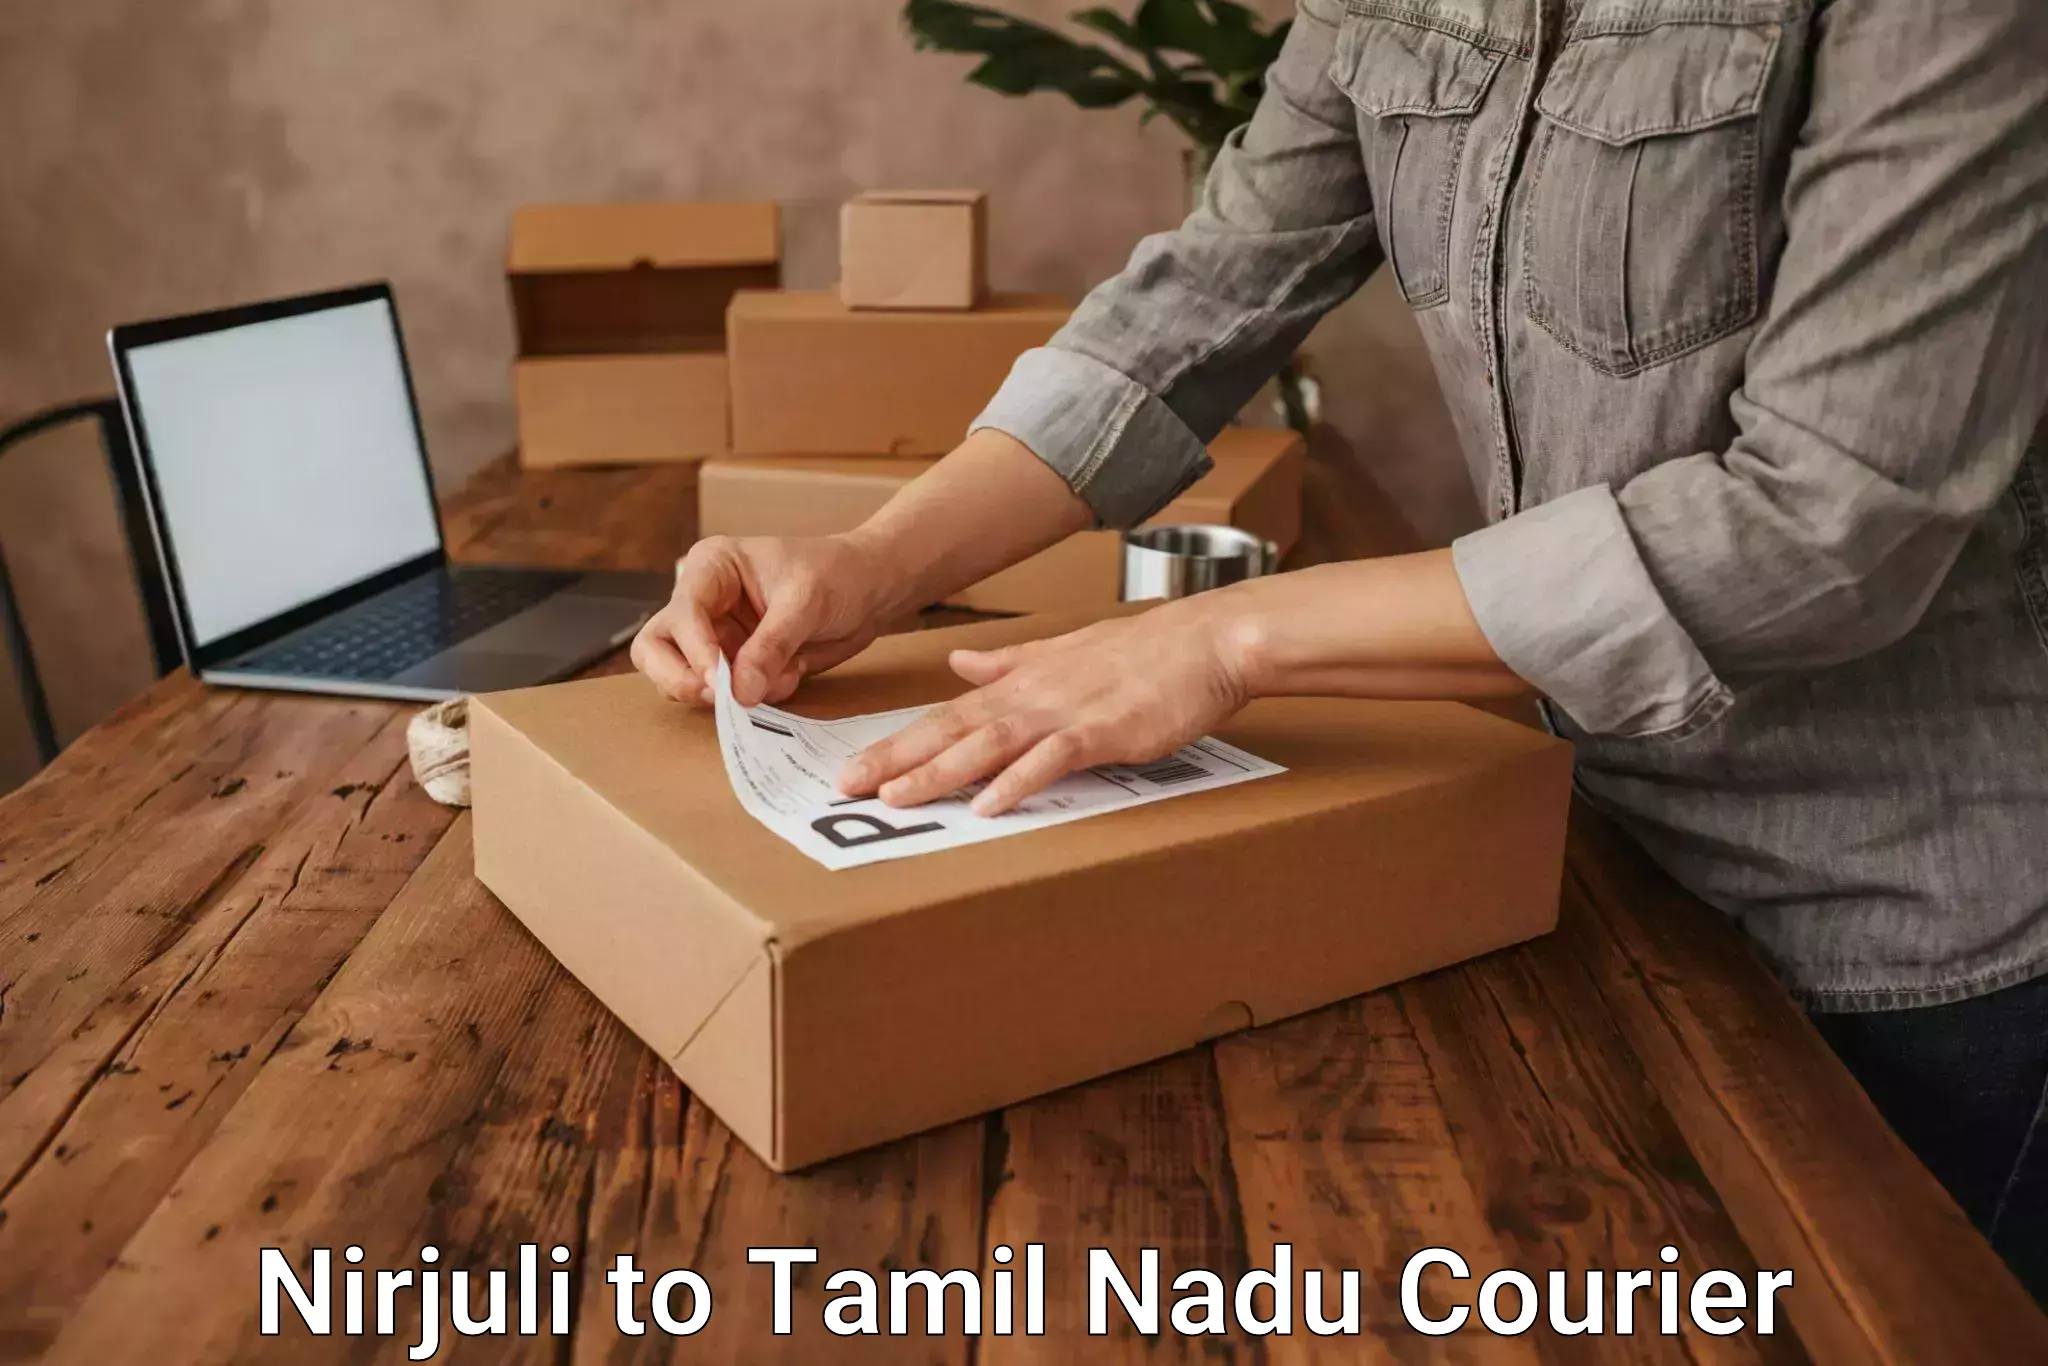 24-hour delivery options Nirjuli to Erode